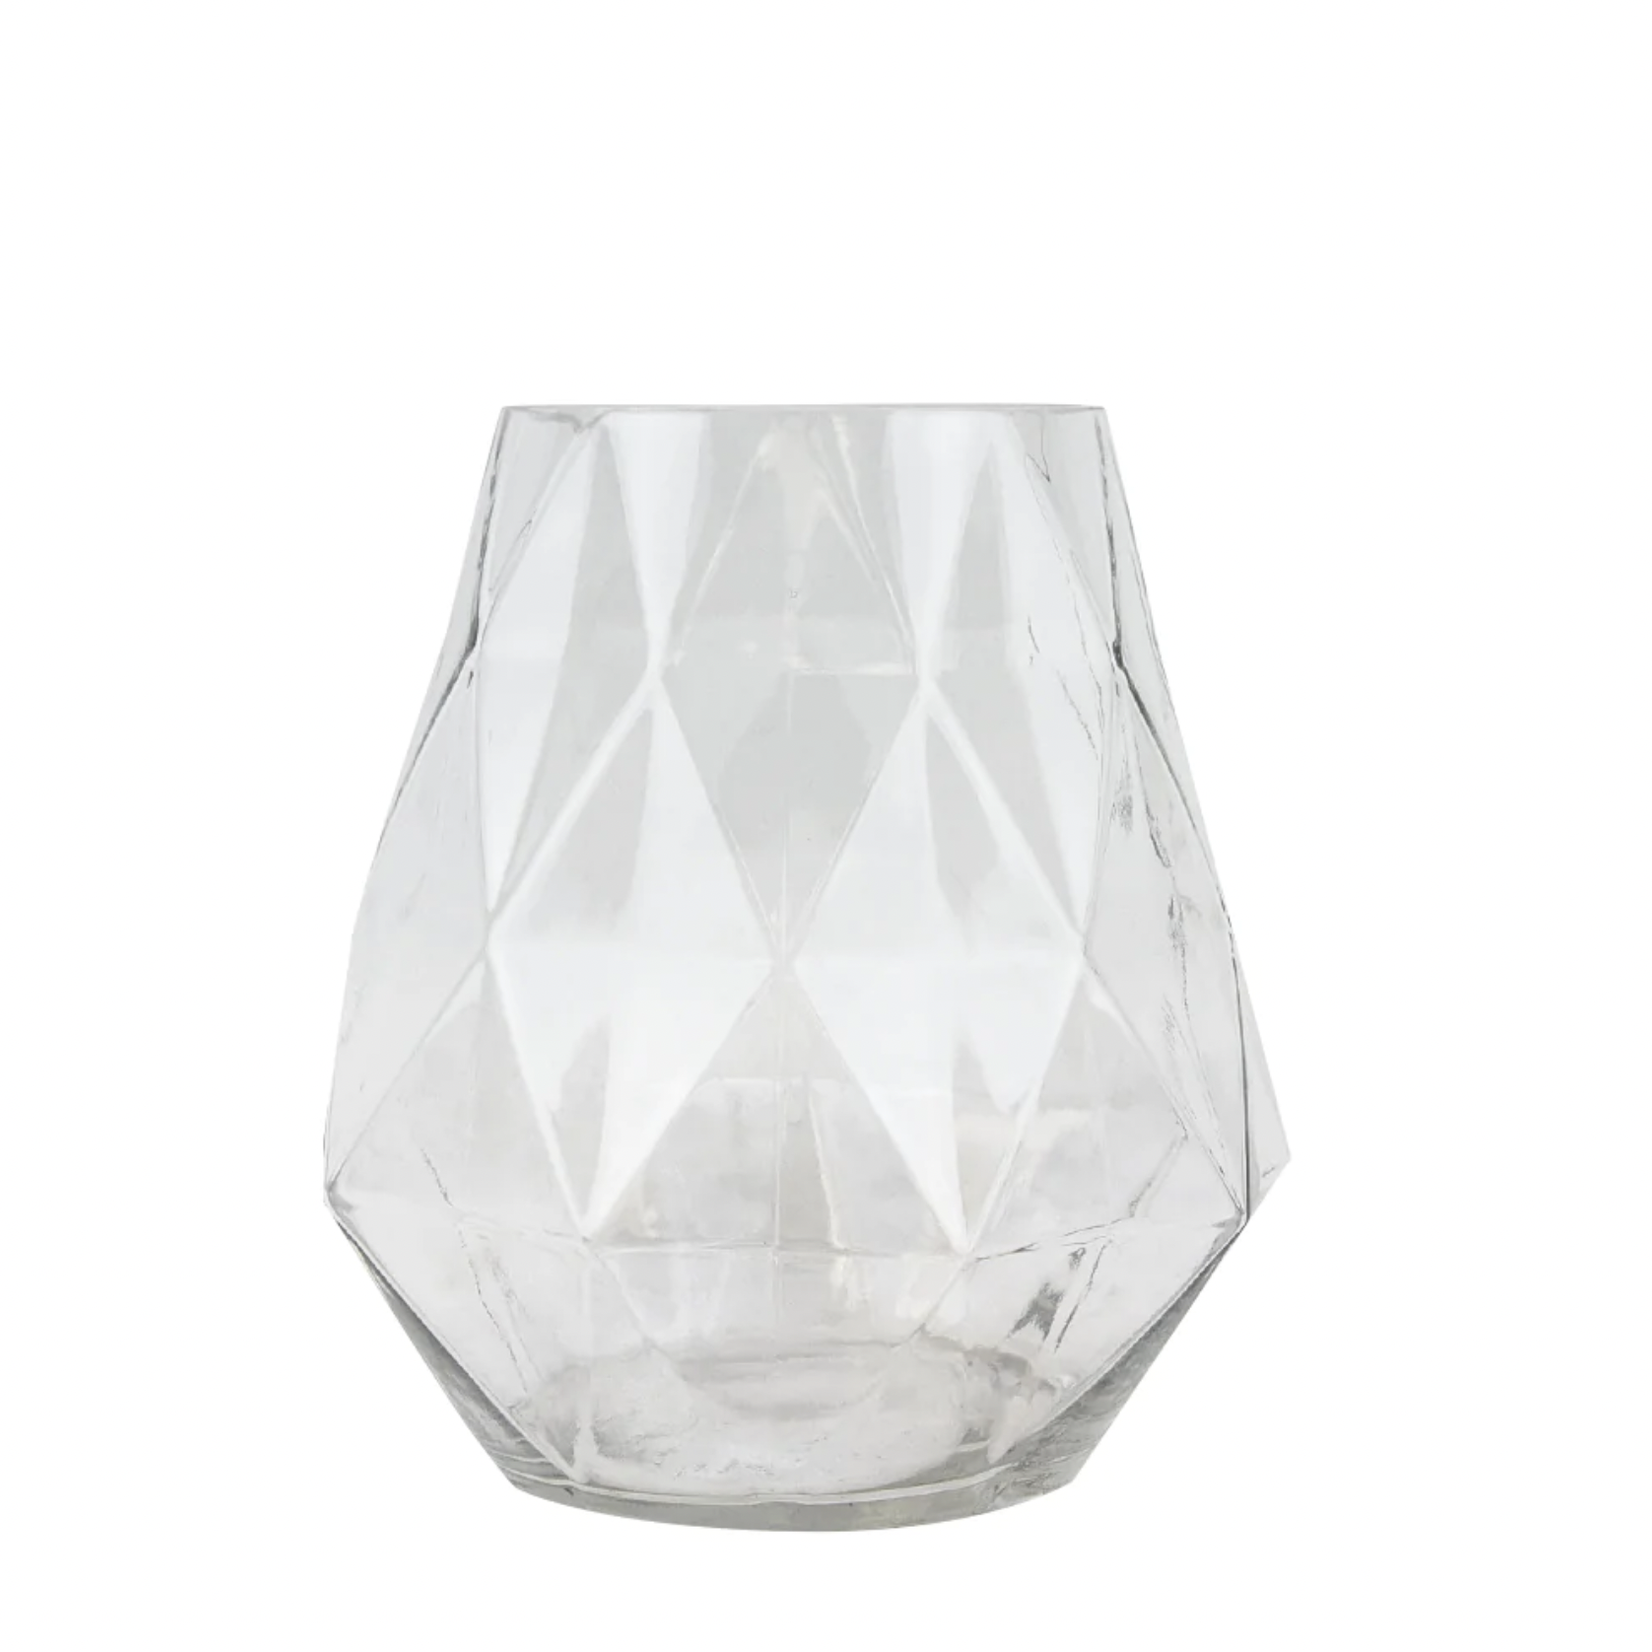 60% off was $26 now $10.40. 8.5"h x 8.25" CLEAR GLASS DIAMOND VASE opening 4.25"